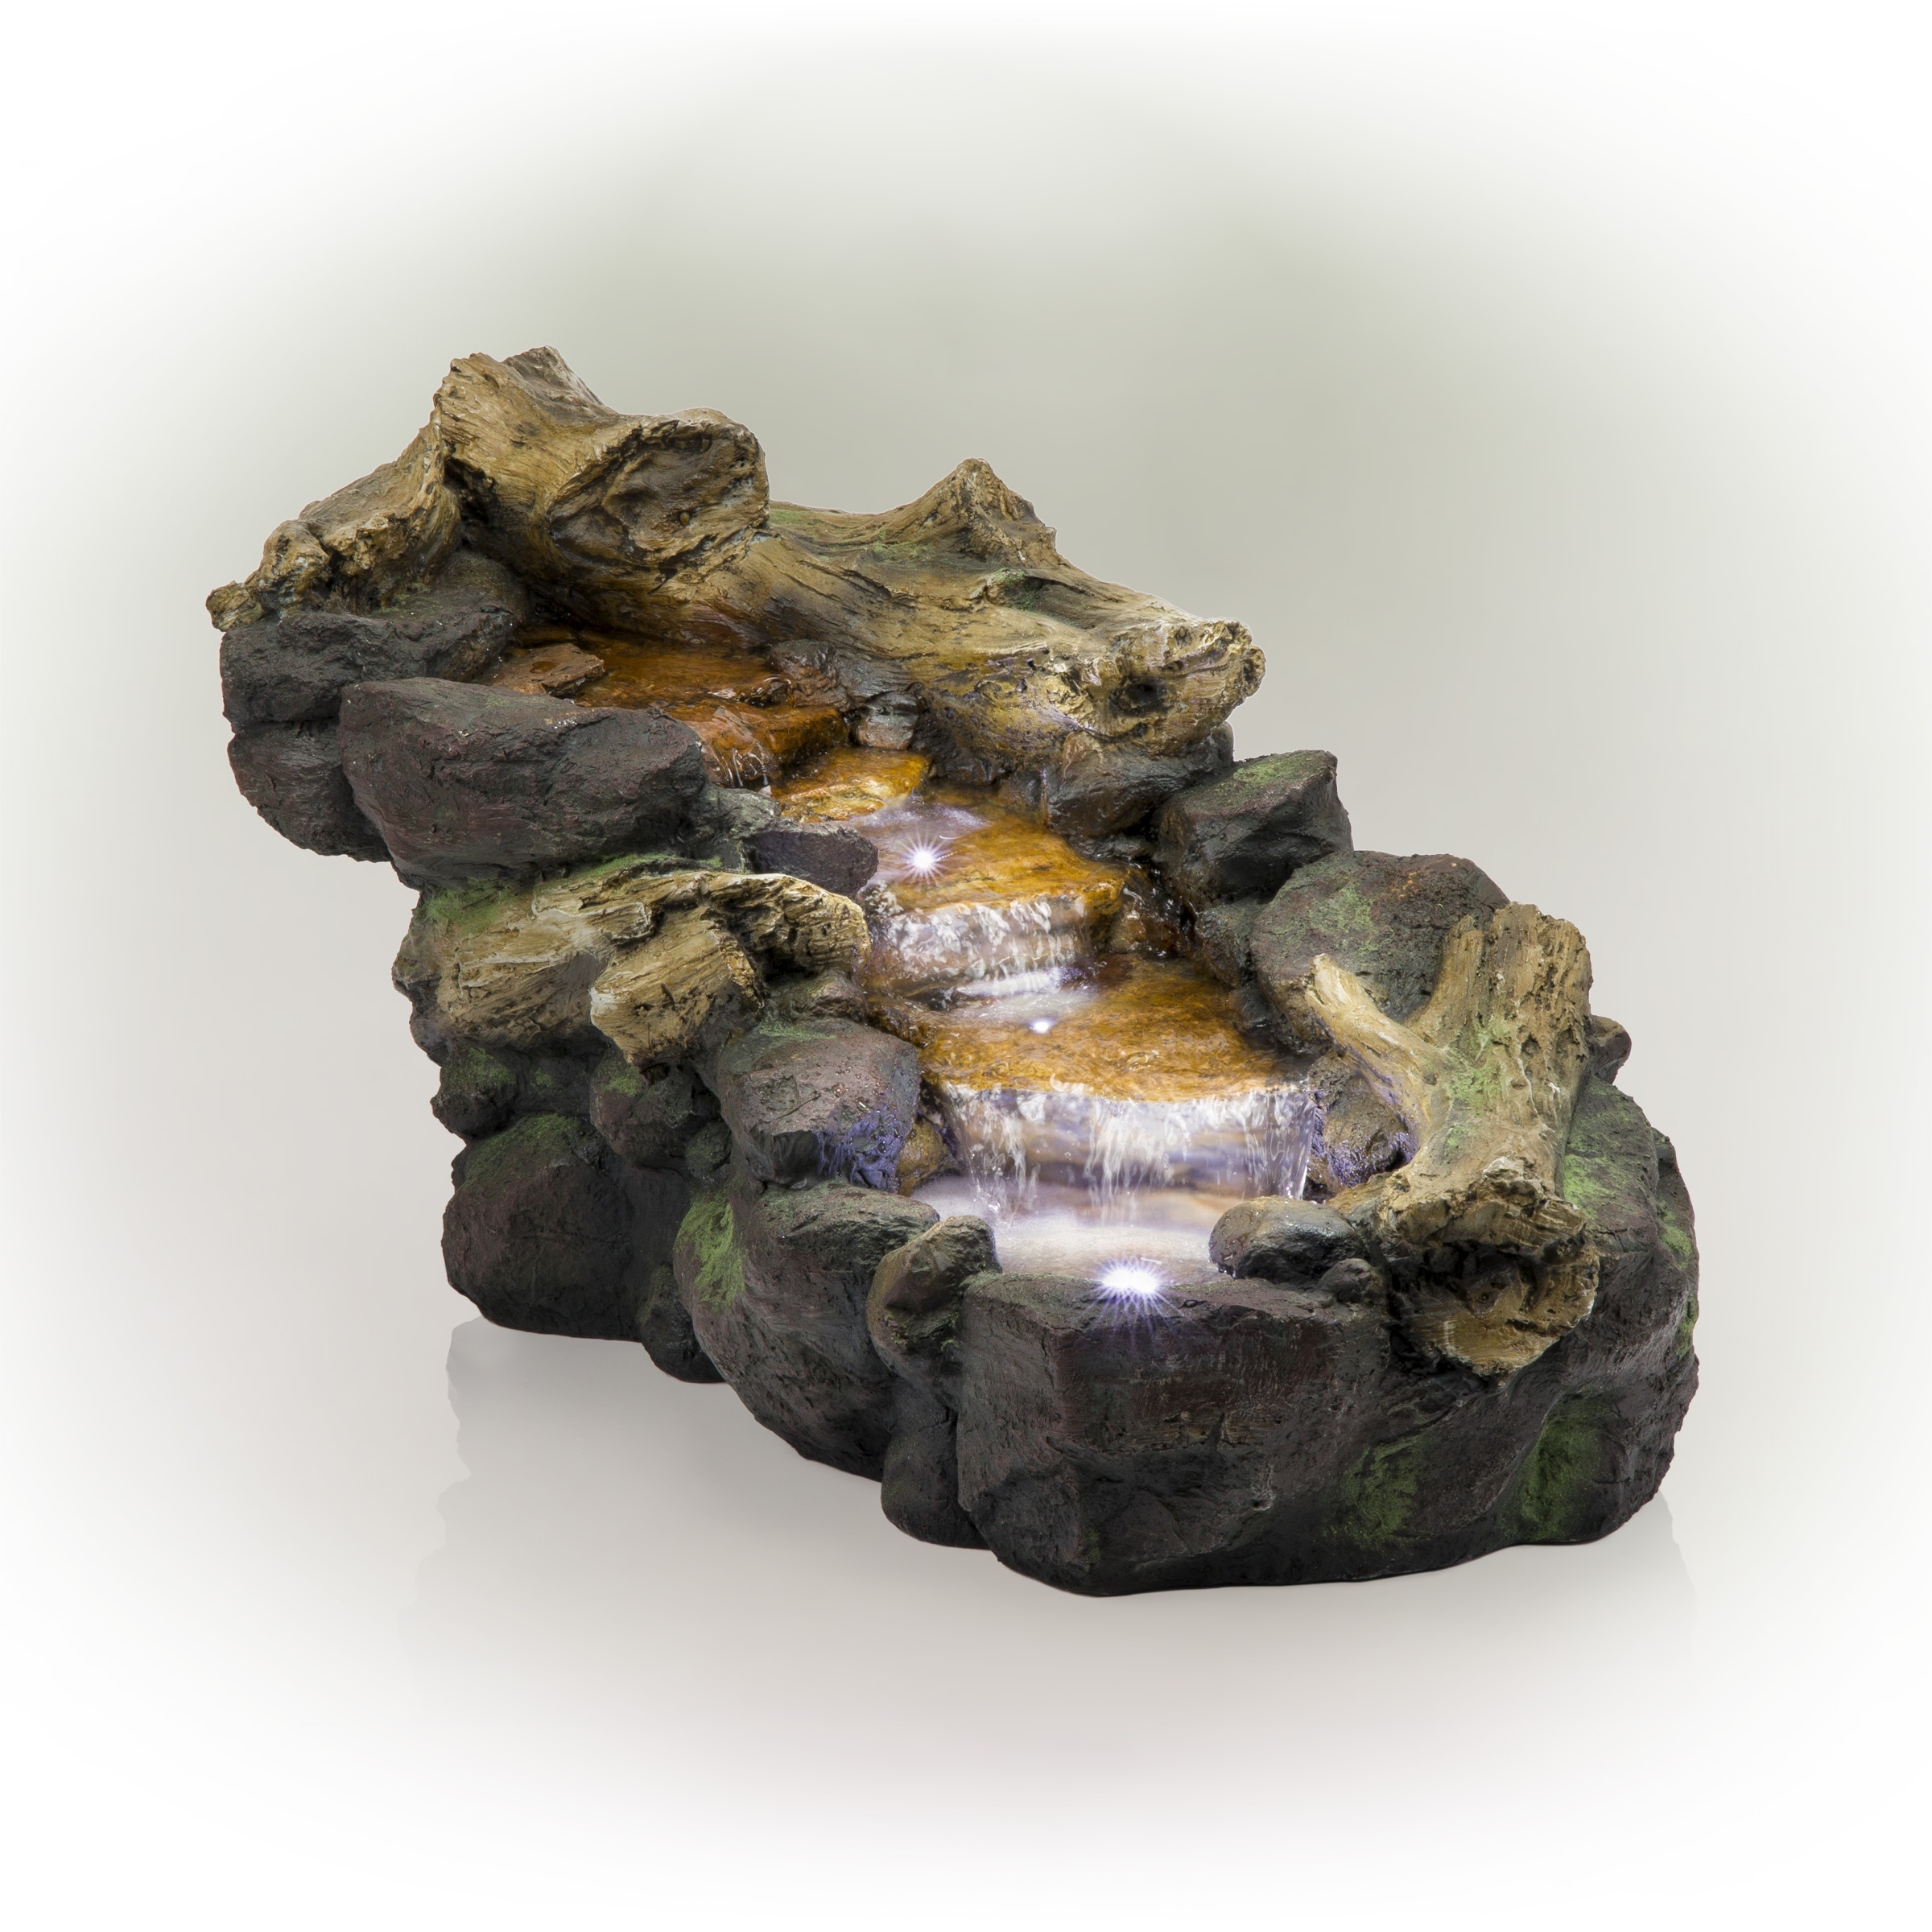 Alpine Corporation 41" Long Indoor/Outdoor River Rock and Log Fountain with LED Lights - image 3 of 12